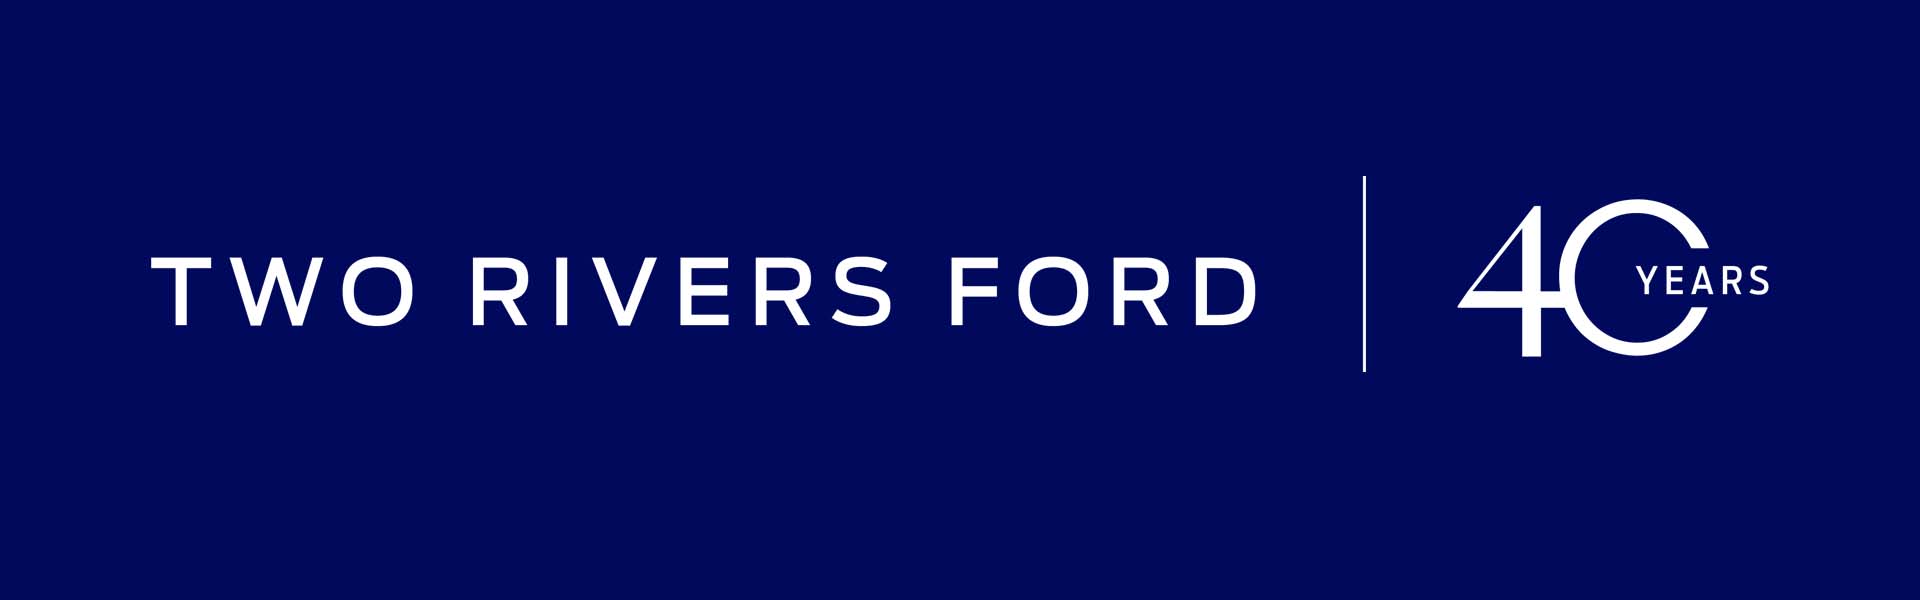 40 Years Two Rivers Ford